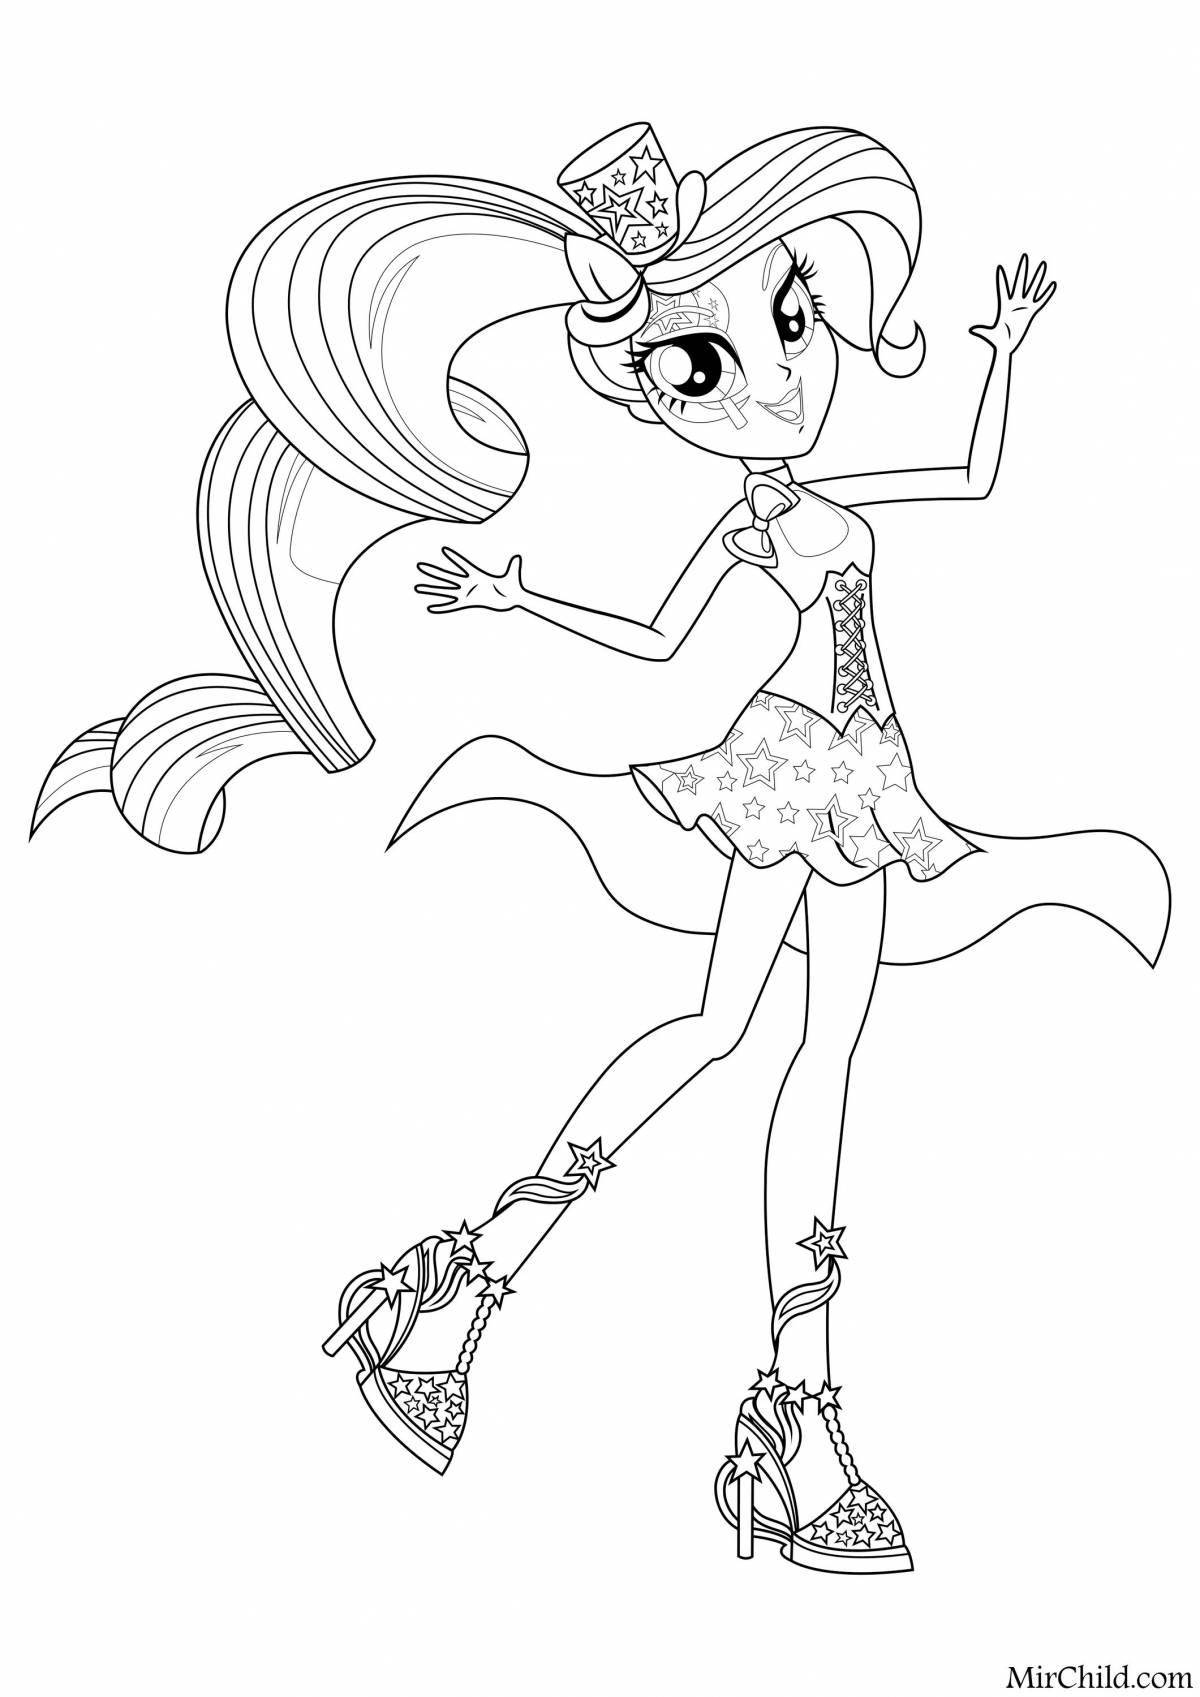 Glittering equestria girls coloring page